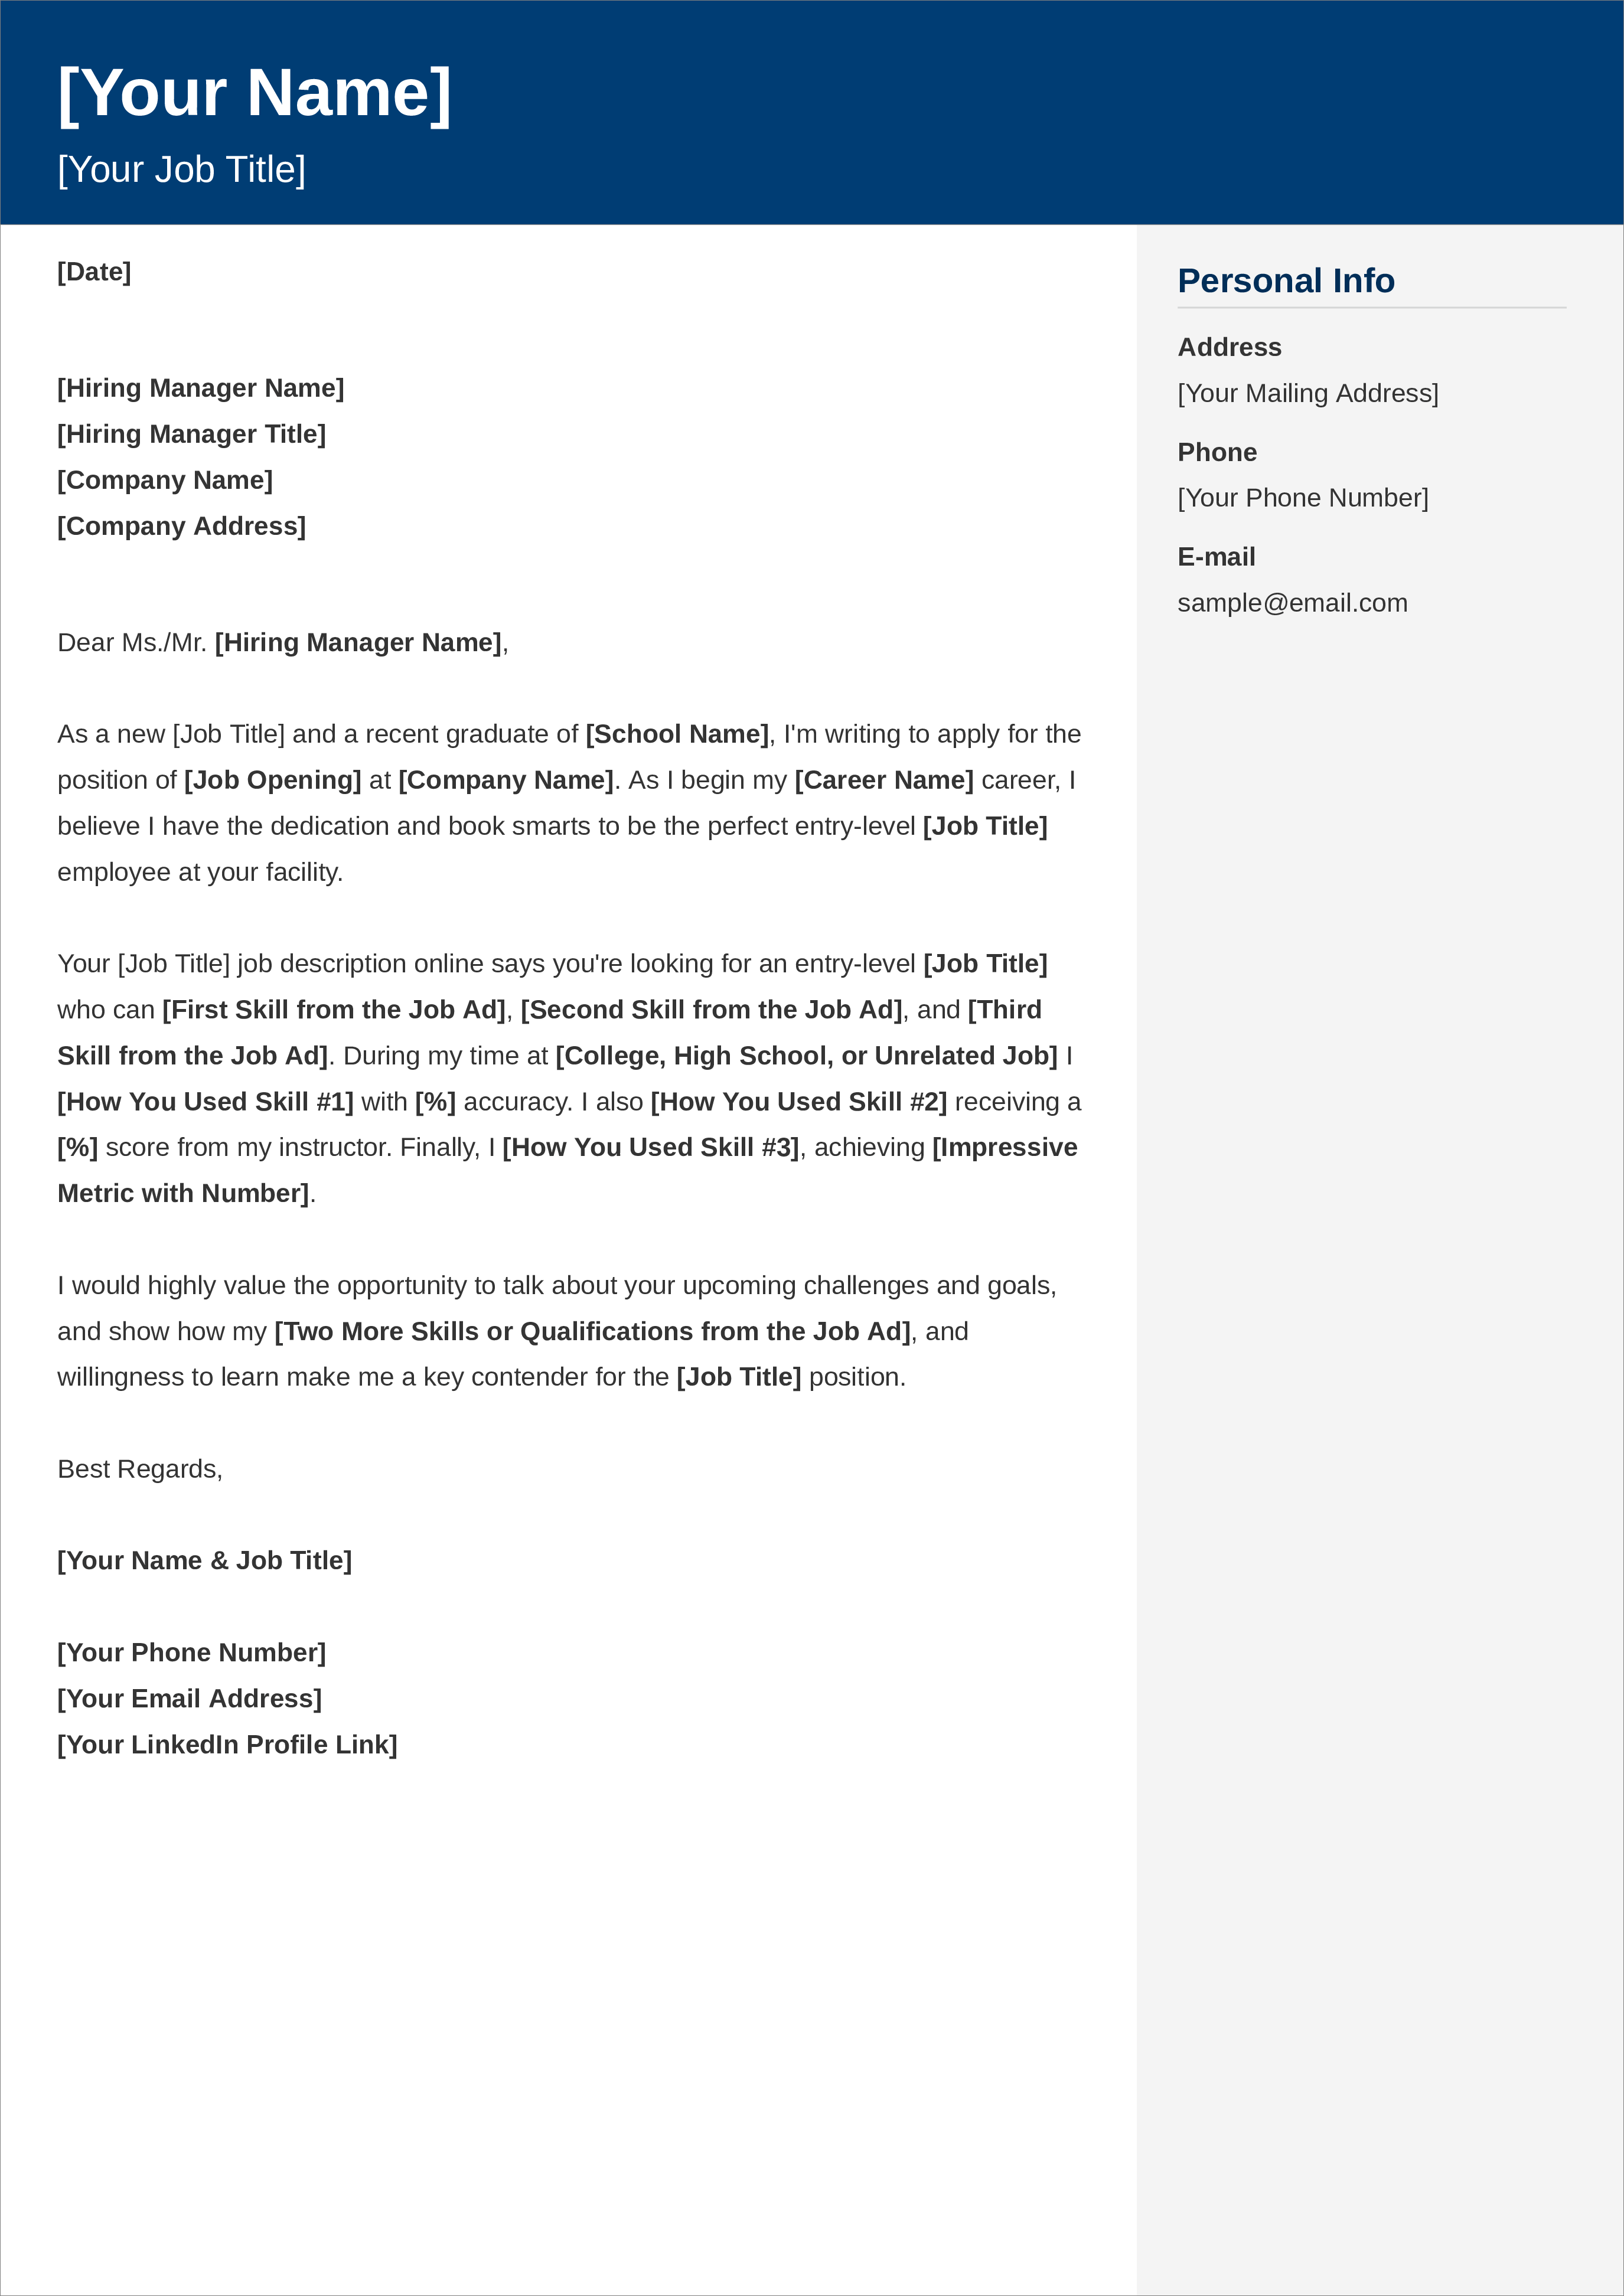 General Cover Letter That's Not Generic: 3 All-Purpose Samples